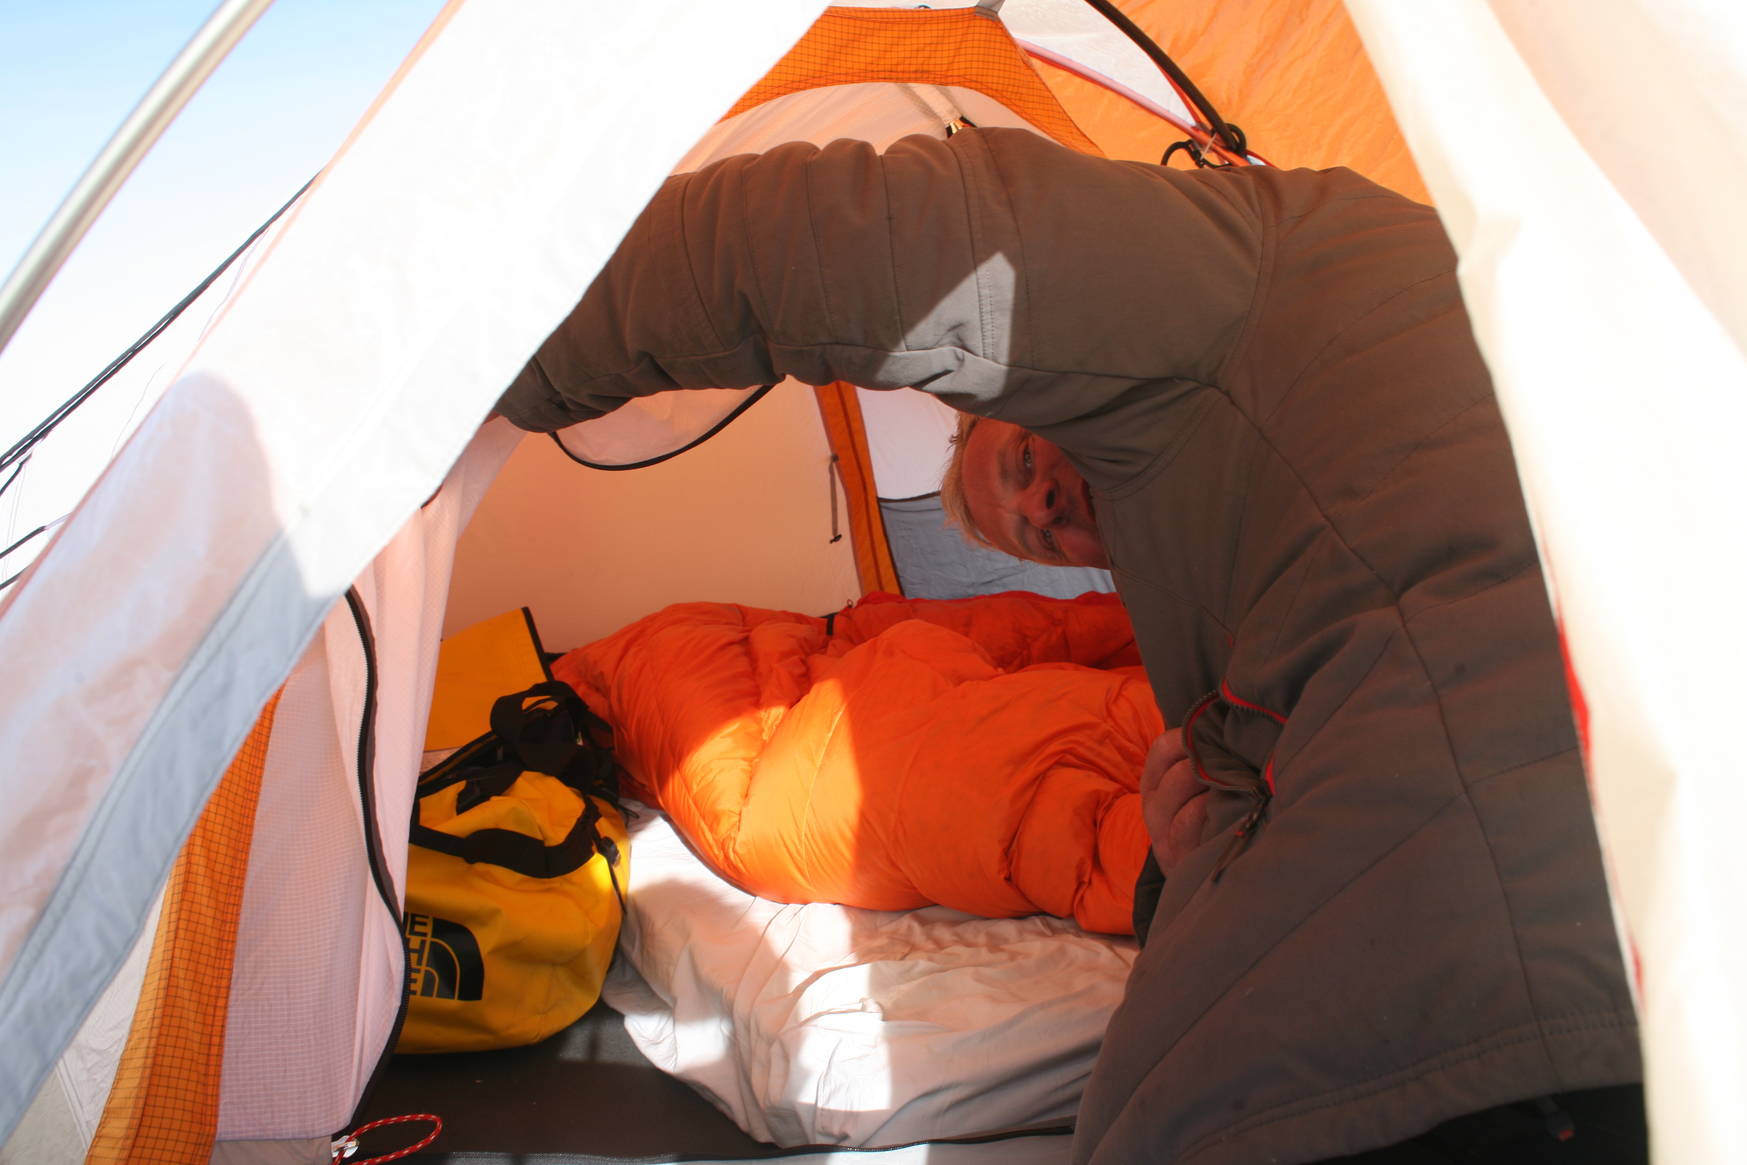 It's unheated, good that there is a cozy sleeping bag inside!